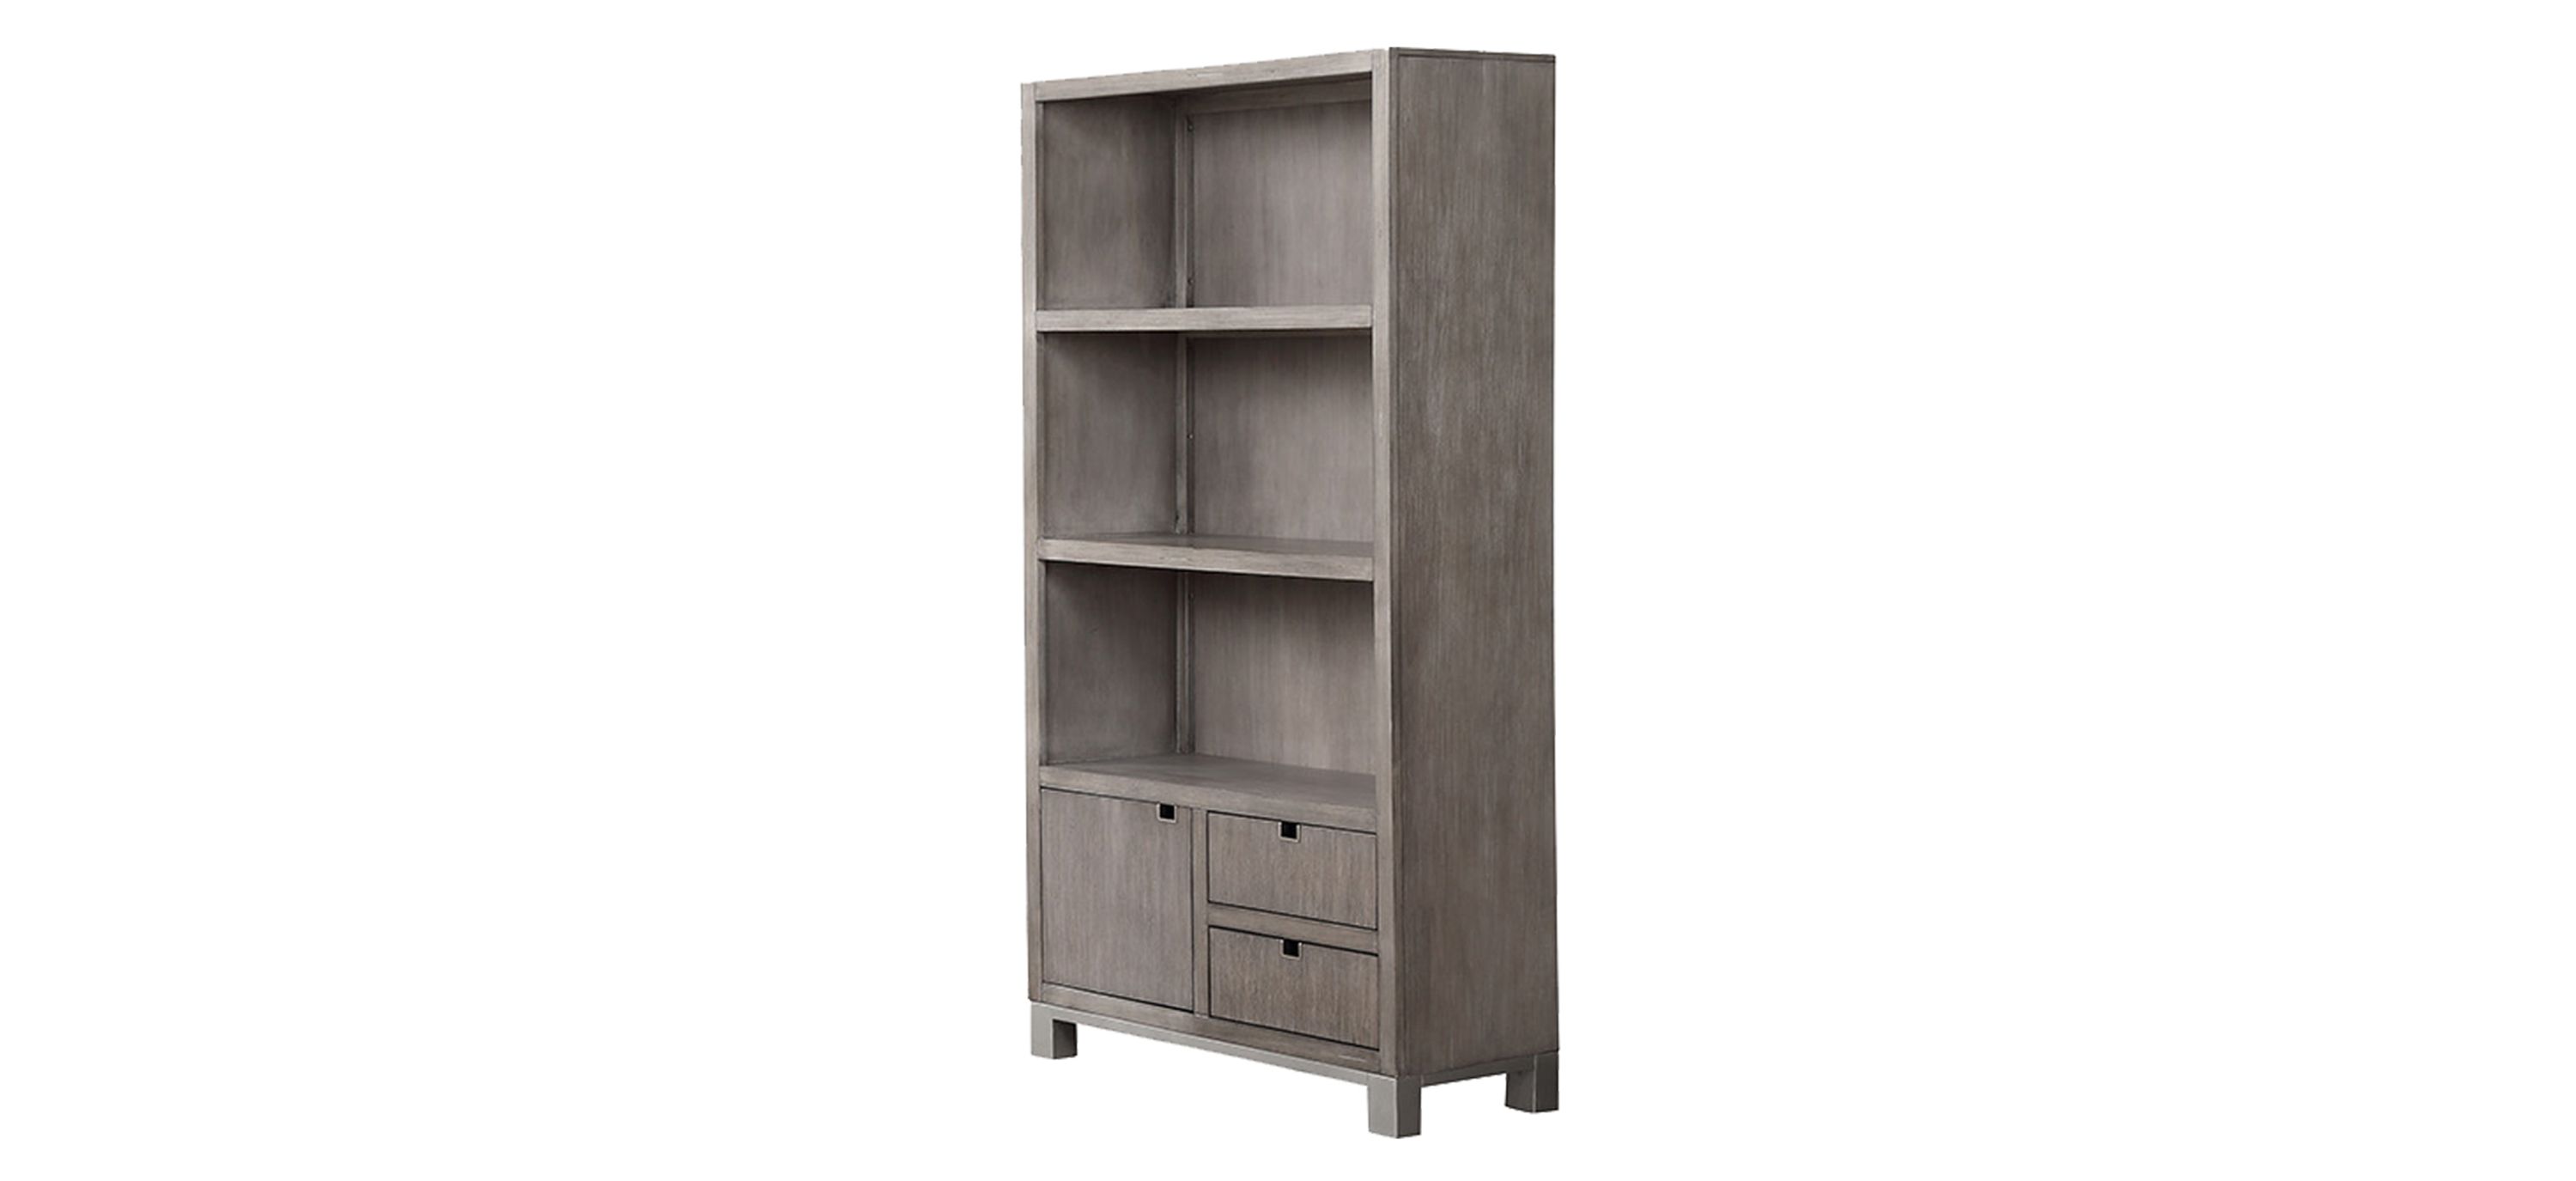 College Heights Bookcase